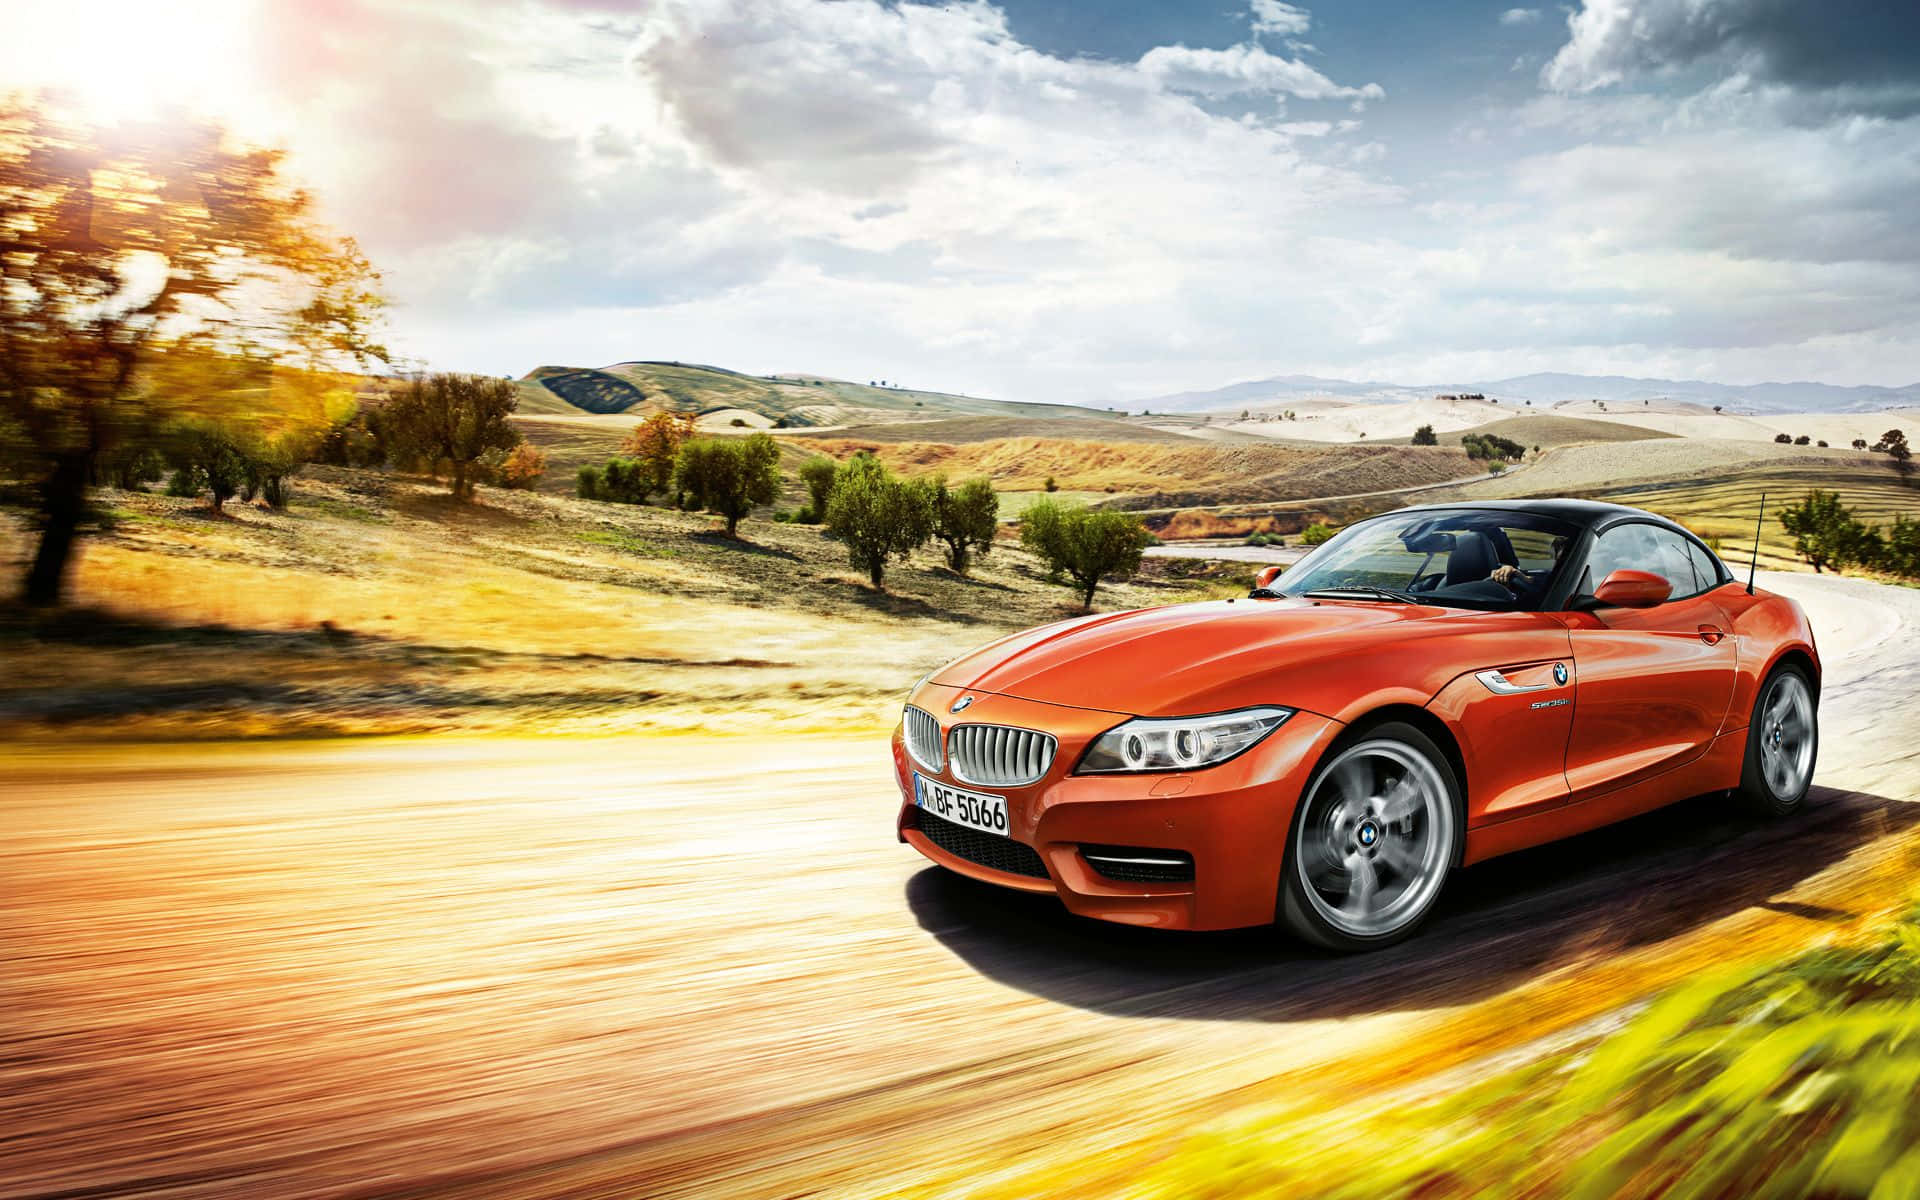 Stunning BMW Z4 Roadster in Action Wallpaper